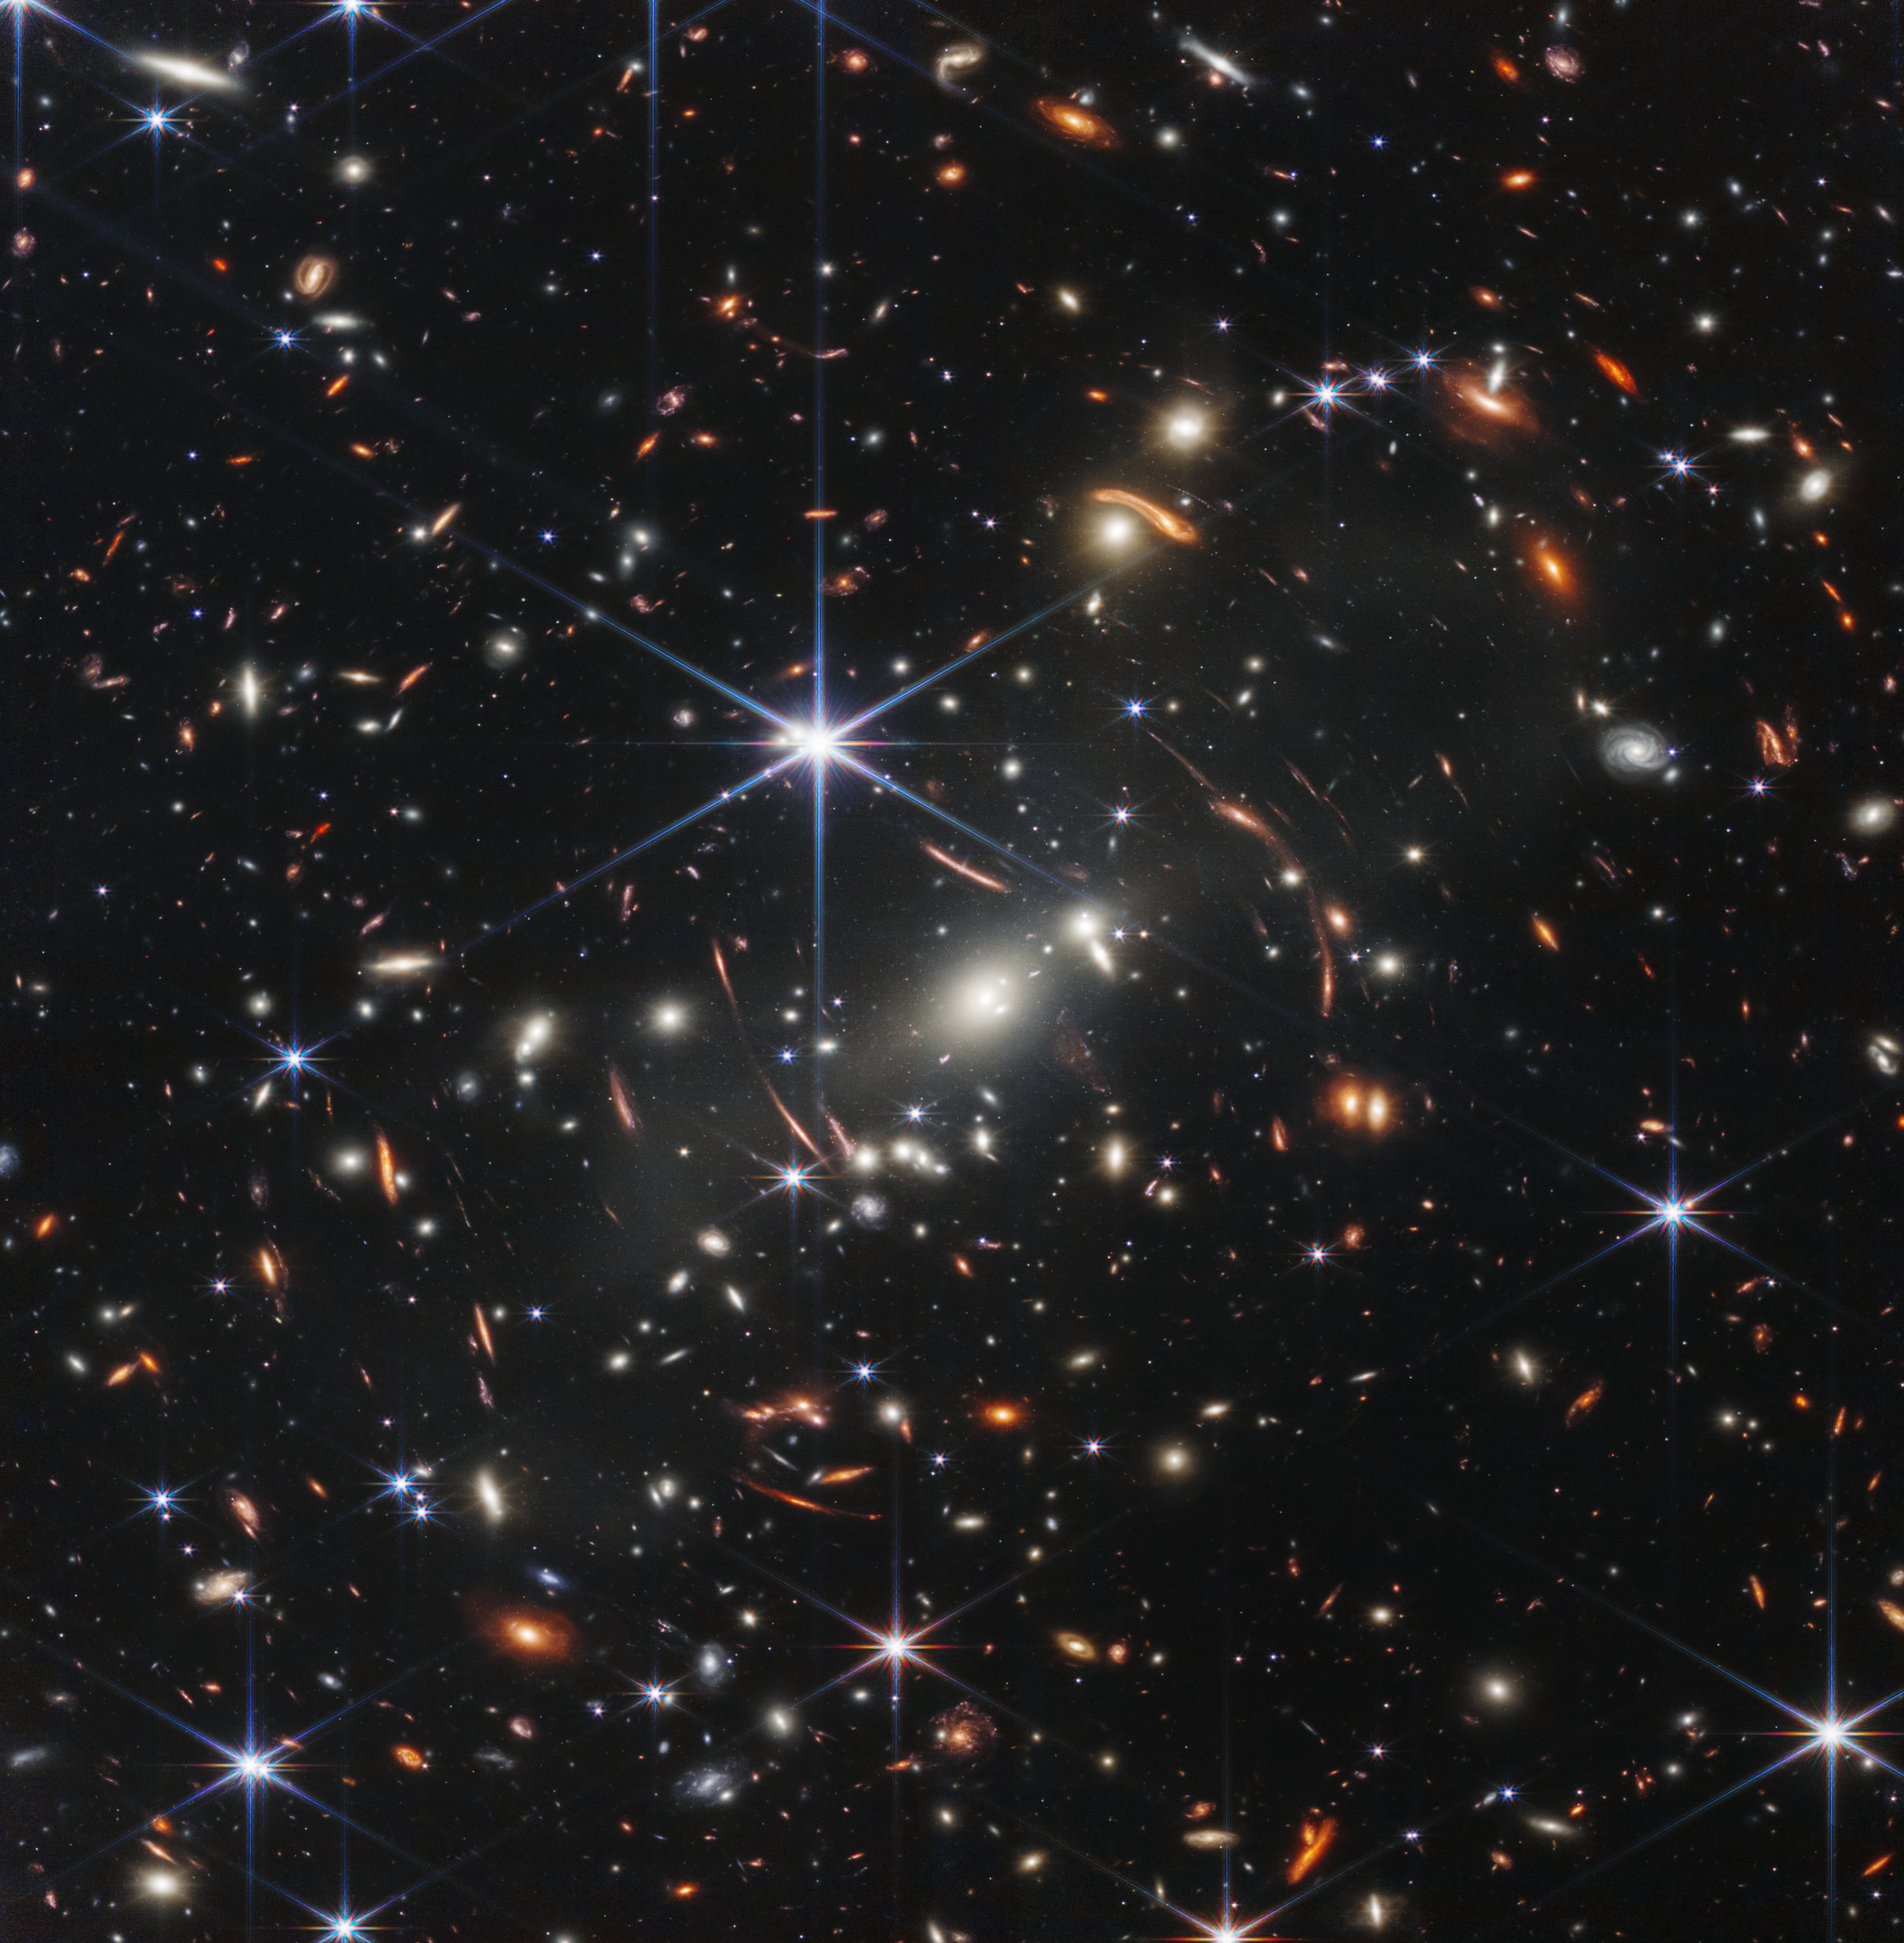 Thousands of galaxies flood this near-infrared image of the galaxy cluster SMACS 723